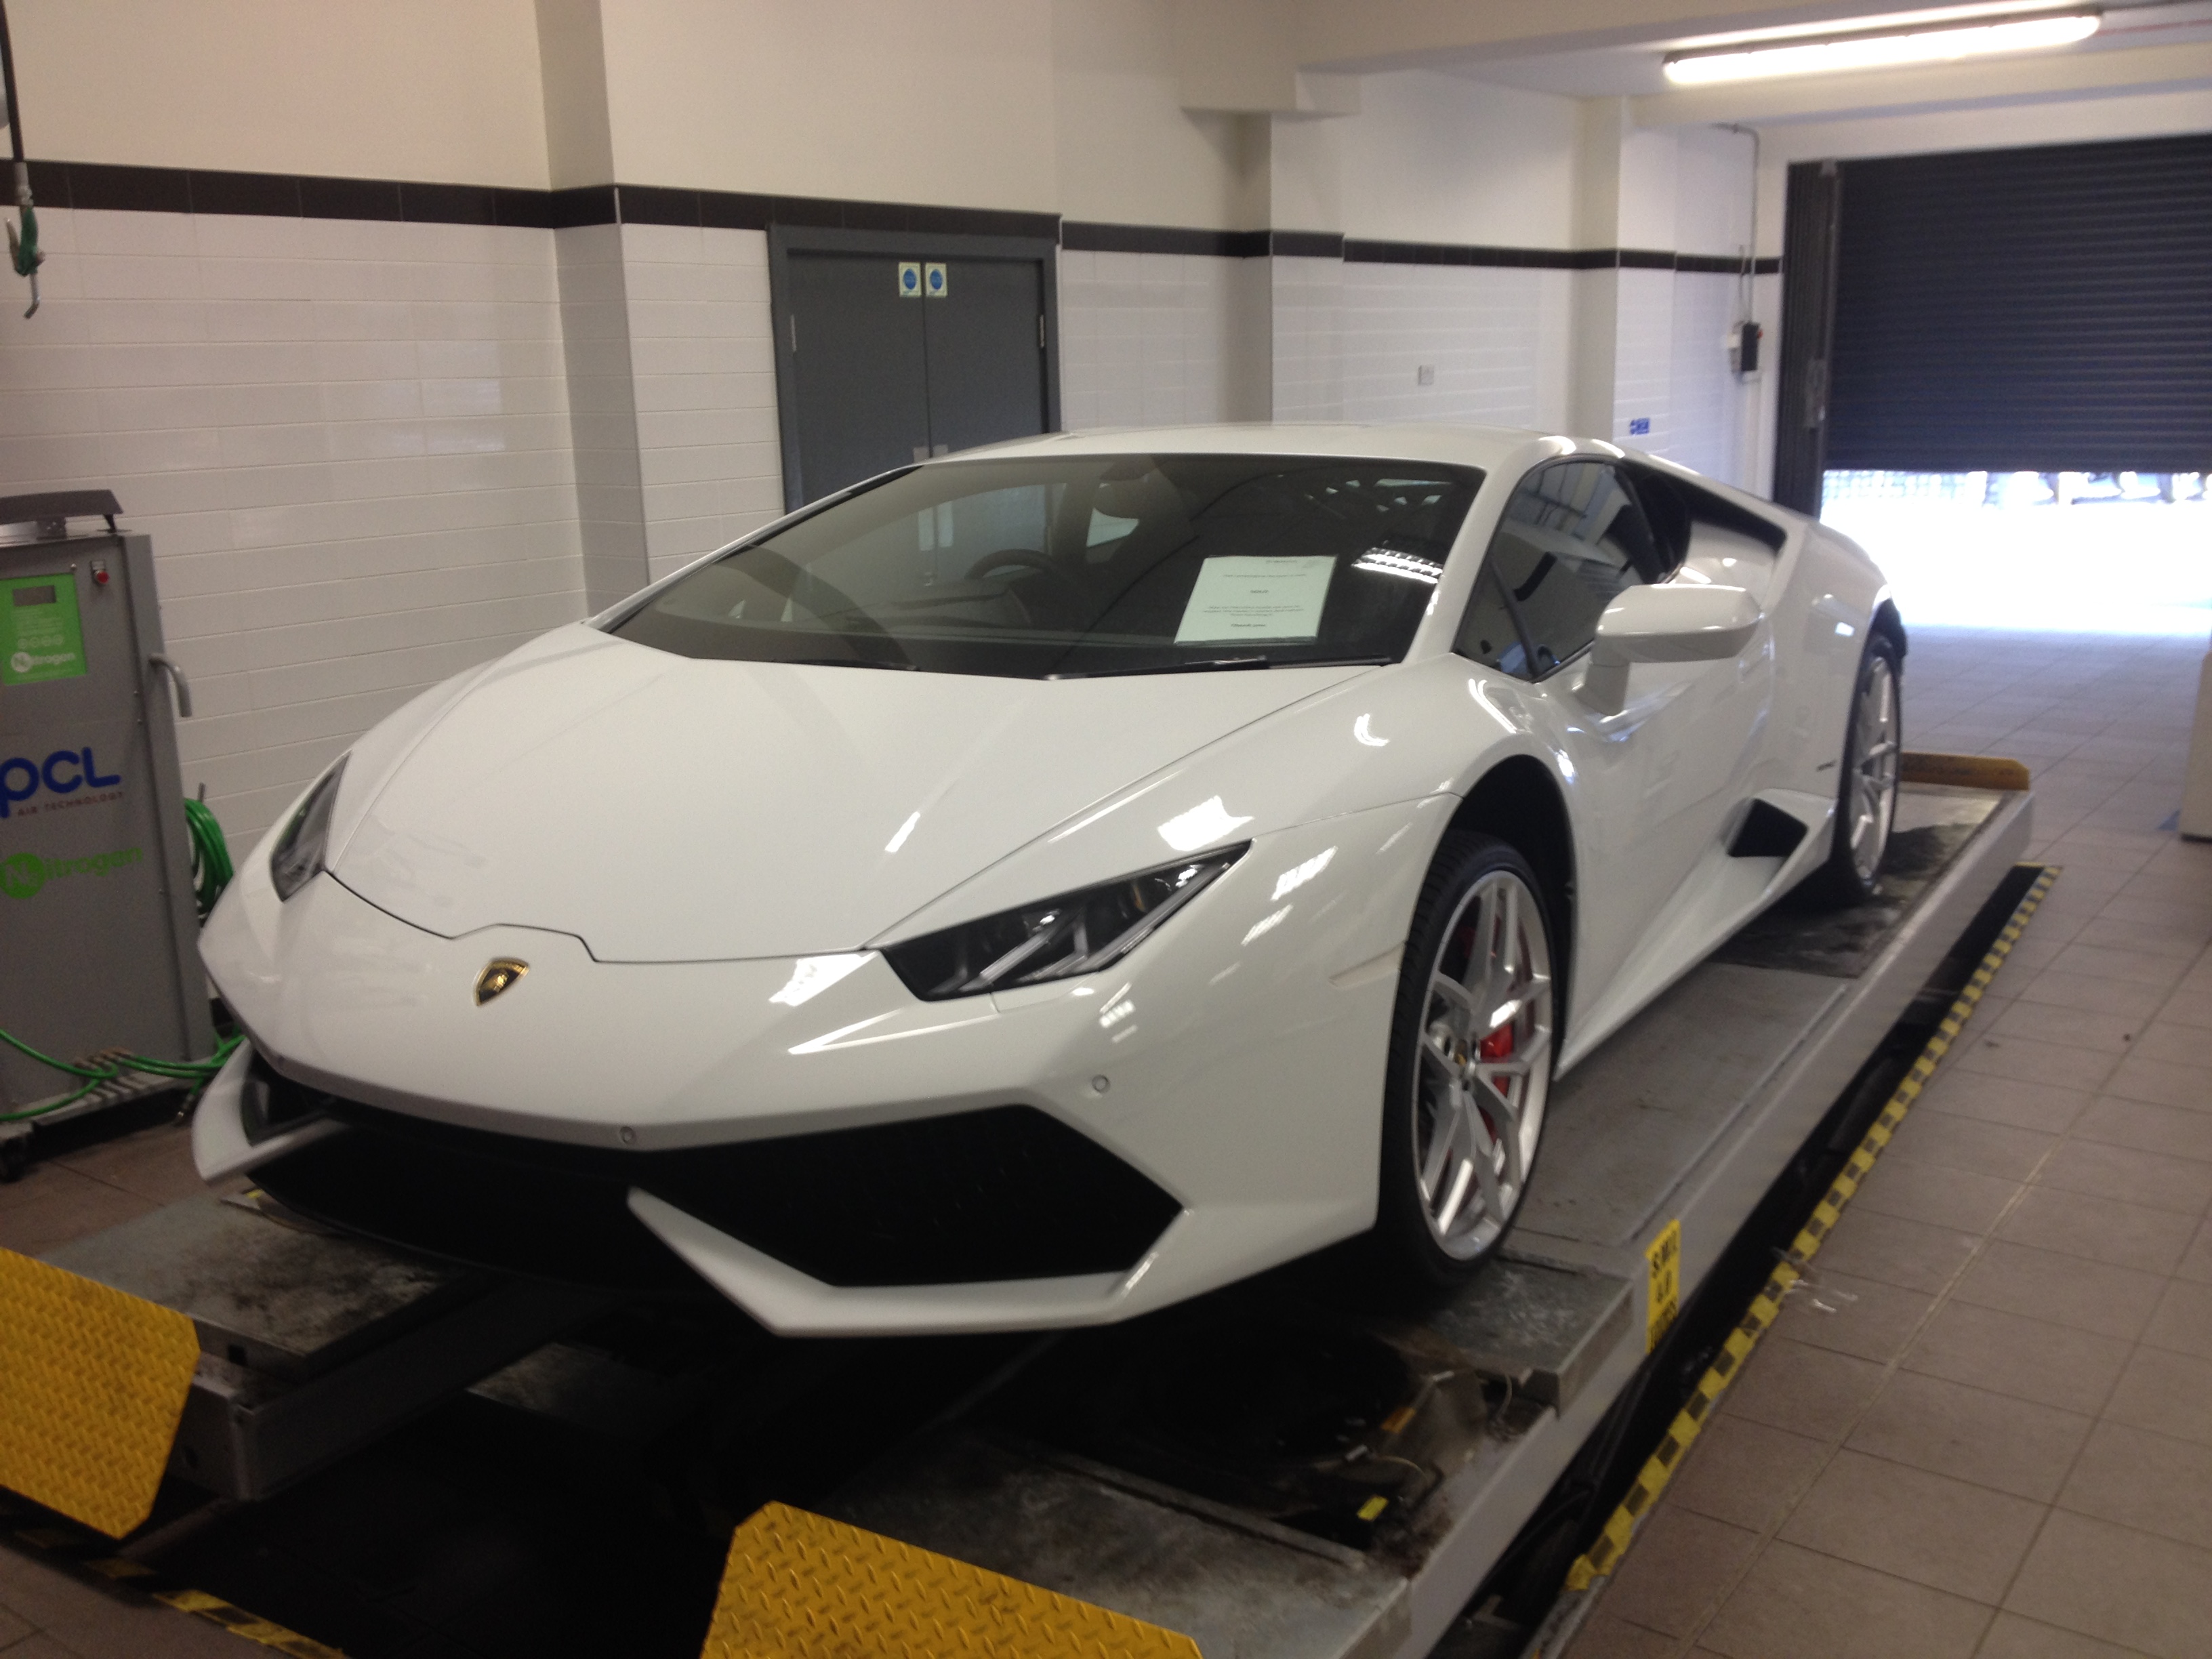 Paint protection film fitted to a Lamborghini Huracan